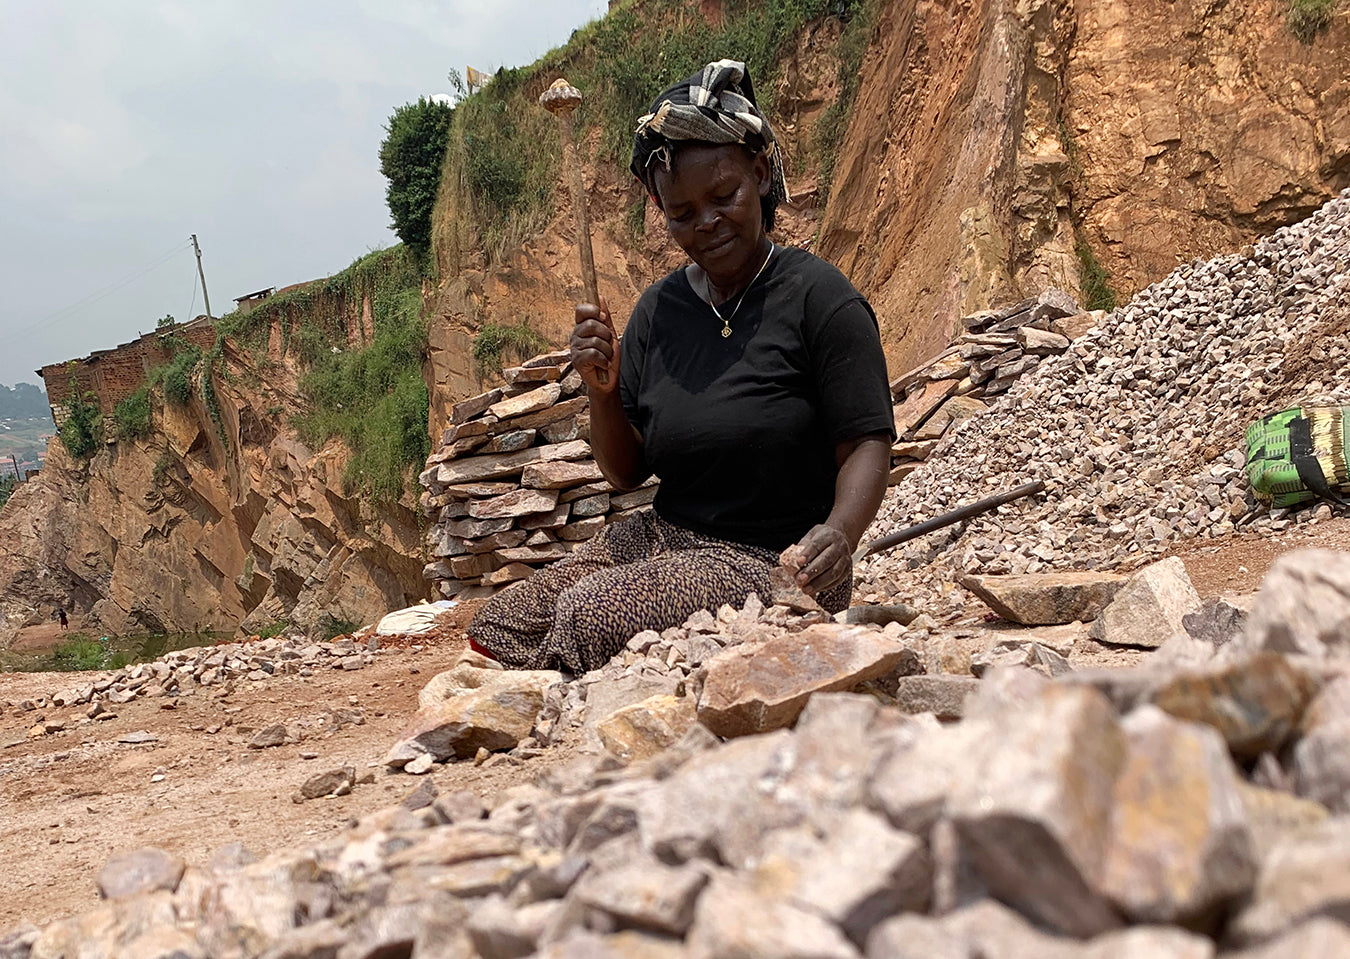 Ugandan woman breaking stones in a quarry with a makeshift hammer